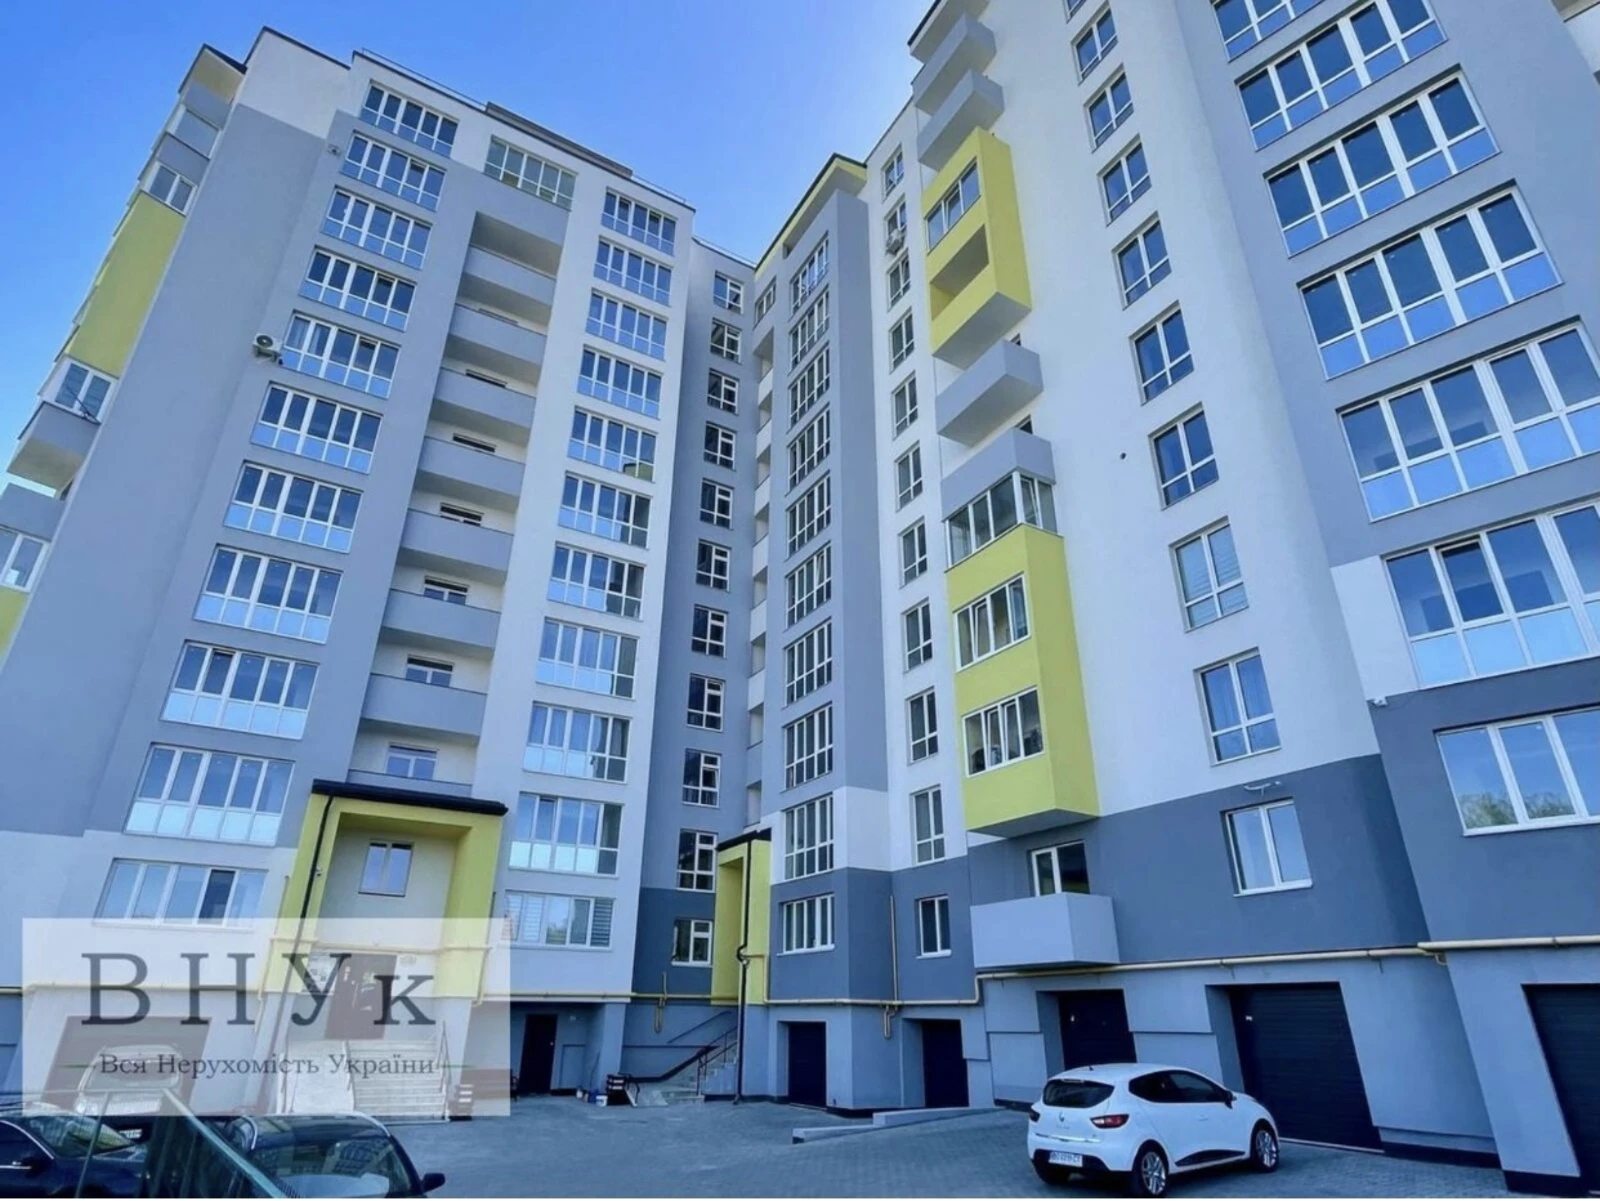 Apartments for sale. 2 rooms, 70 m², 11 floor/11 floors. Budnoho S. , Ternopil. 